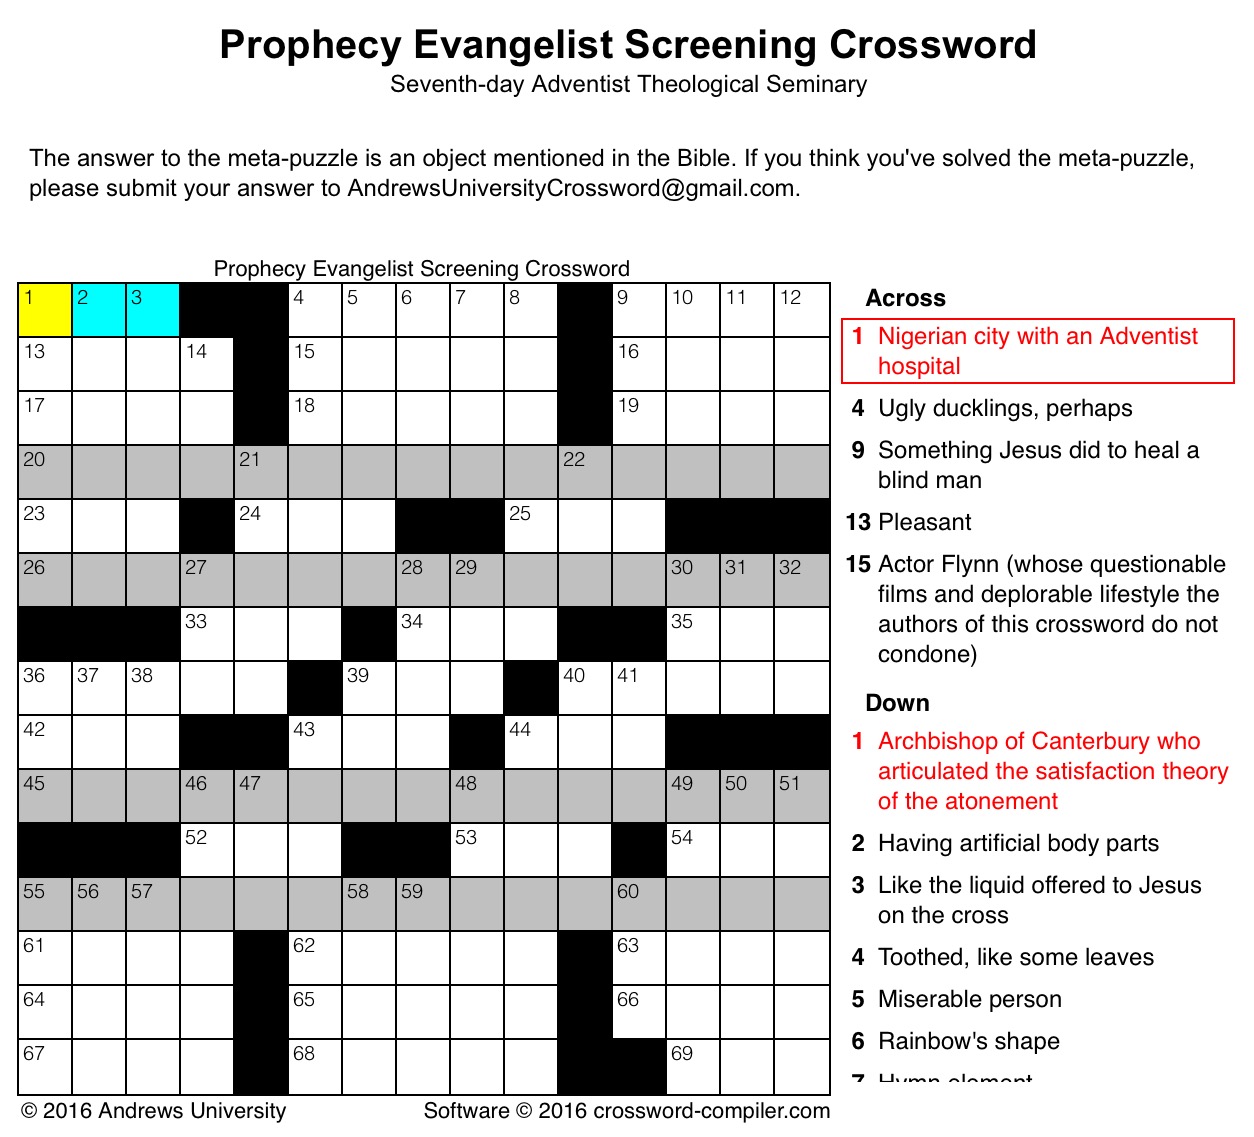 Andrews seminary to identify potential prophecy evangelists with this